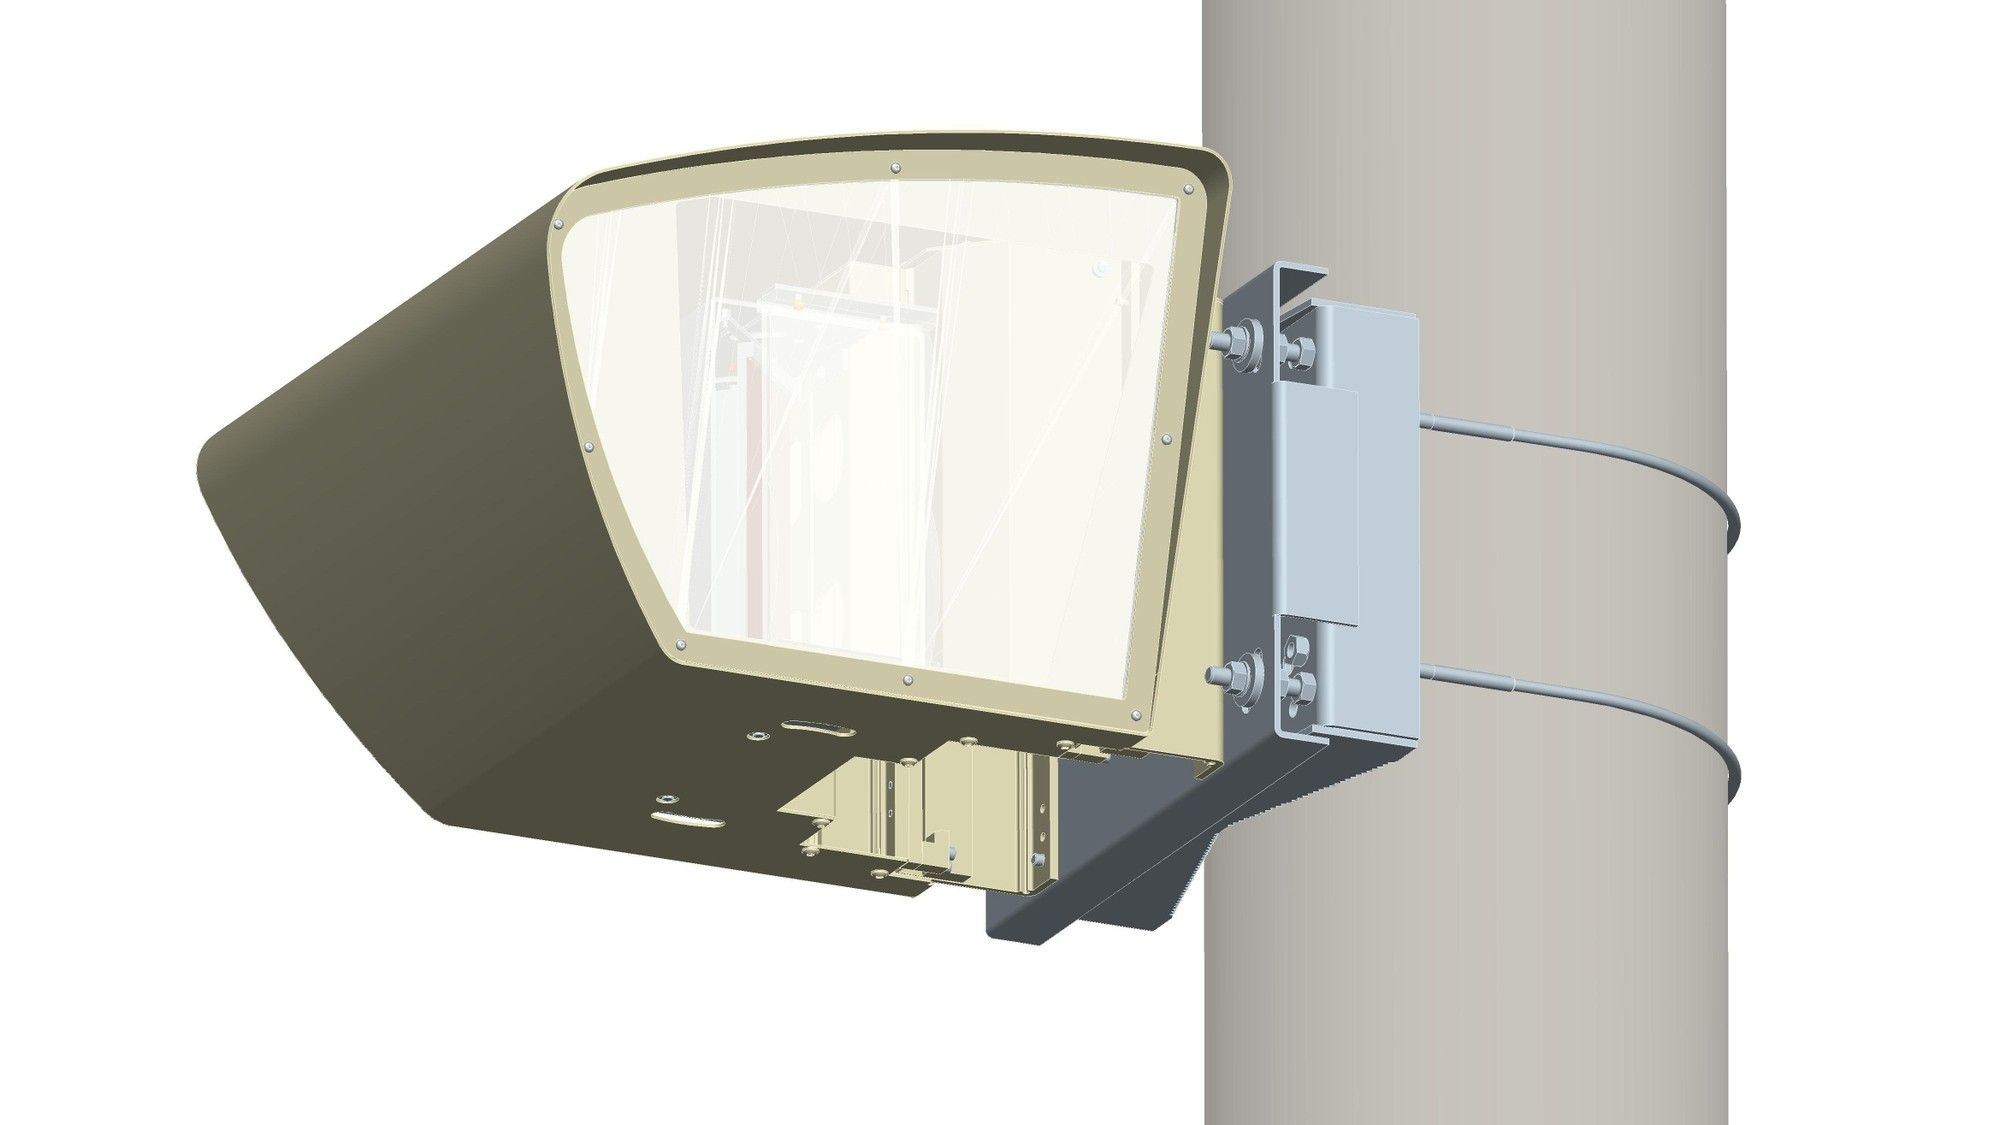 Antenna housing with reflector/lens unit